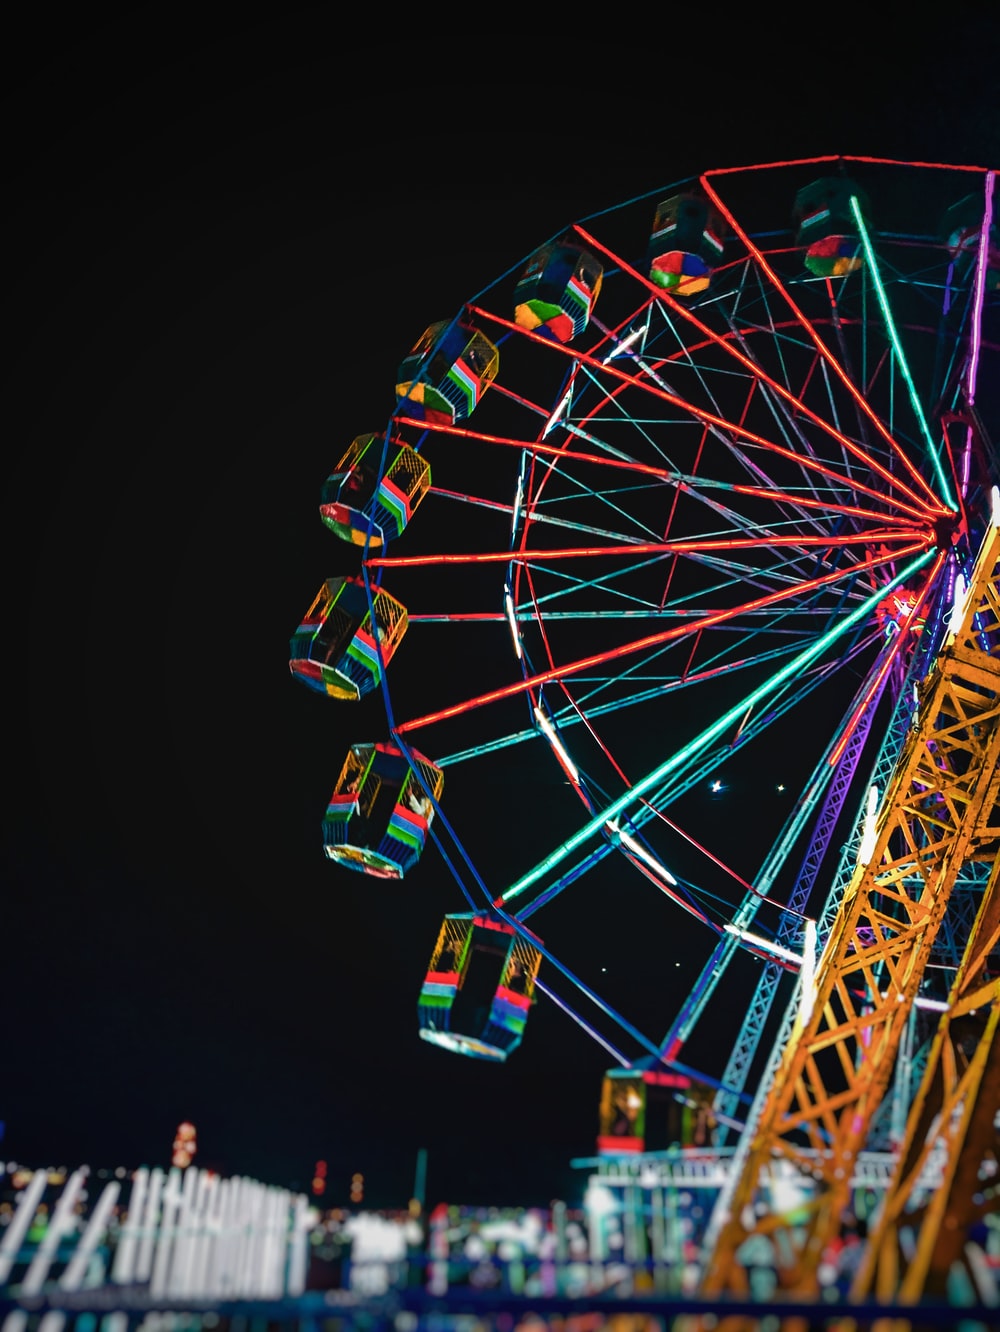 Fun Fair Picture. Download Free Image